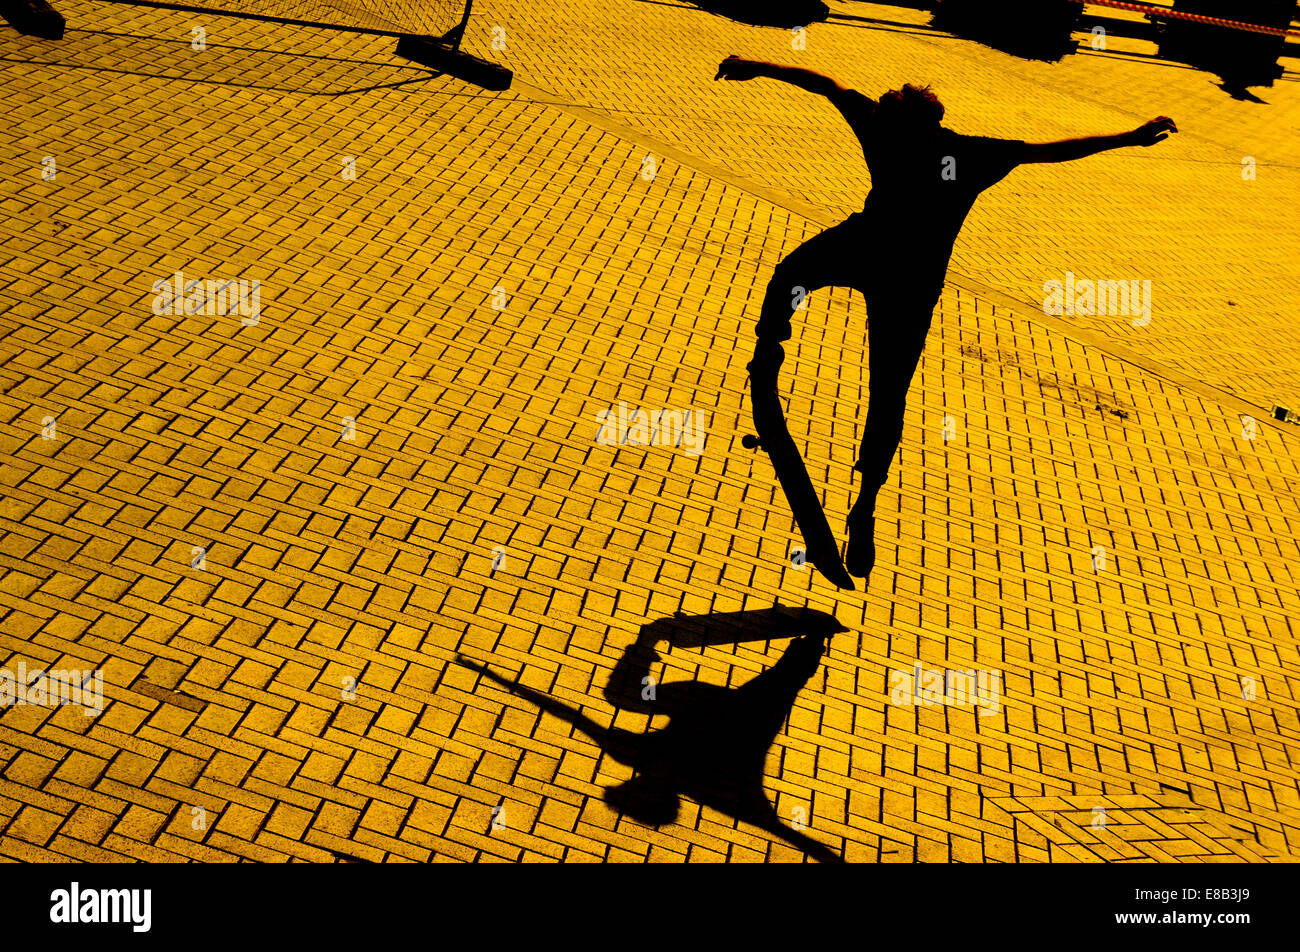 A skateboarder at dusk makes a jump casting a shadow on the brick paved surface. Stock Photo